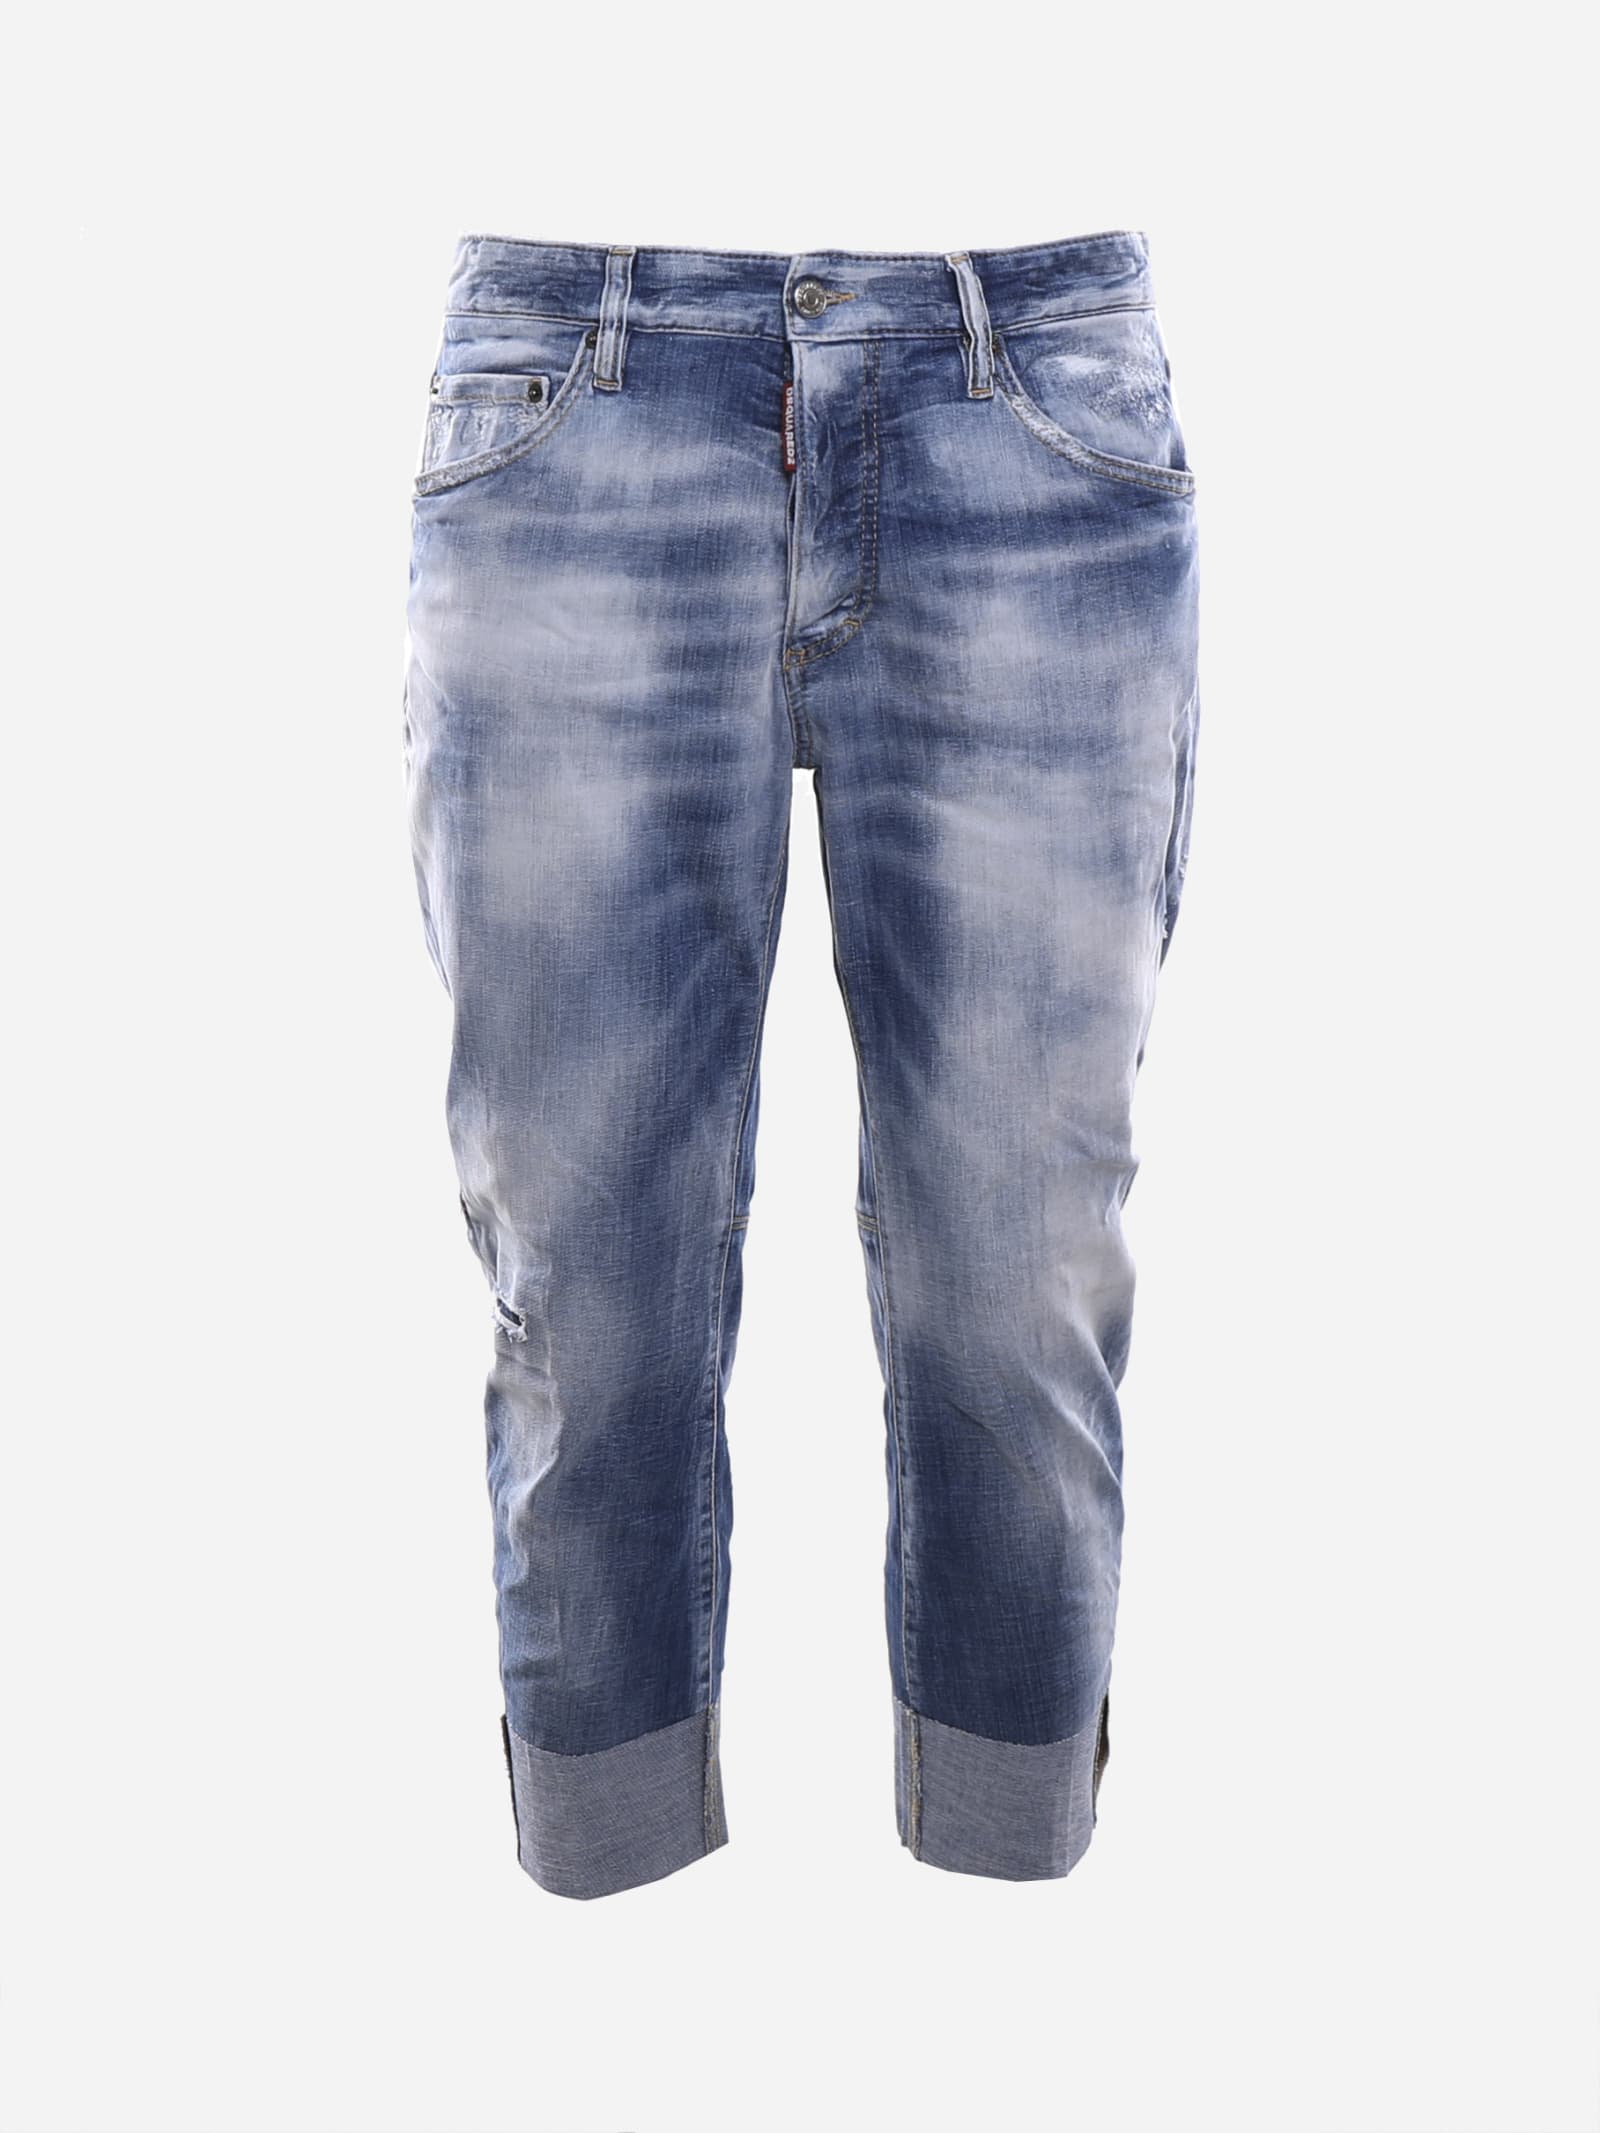 DSQUARED2 FADED-EFFECT STRETCH COTTON JEANS WITH TURN-UPS,S71LB0900 S30342470